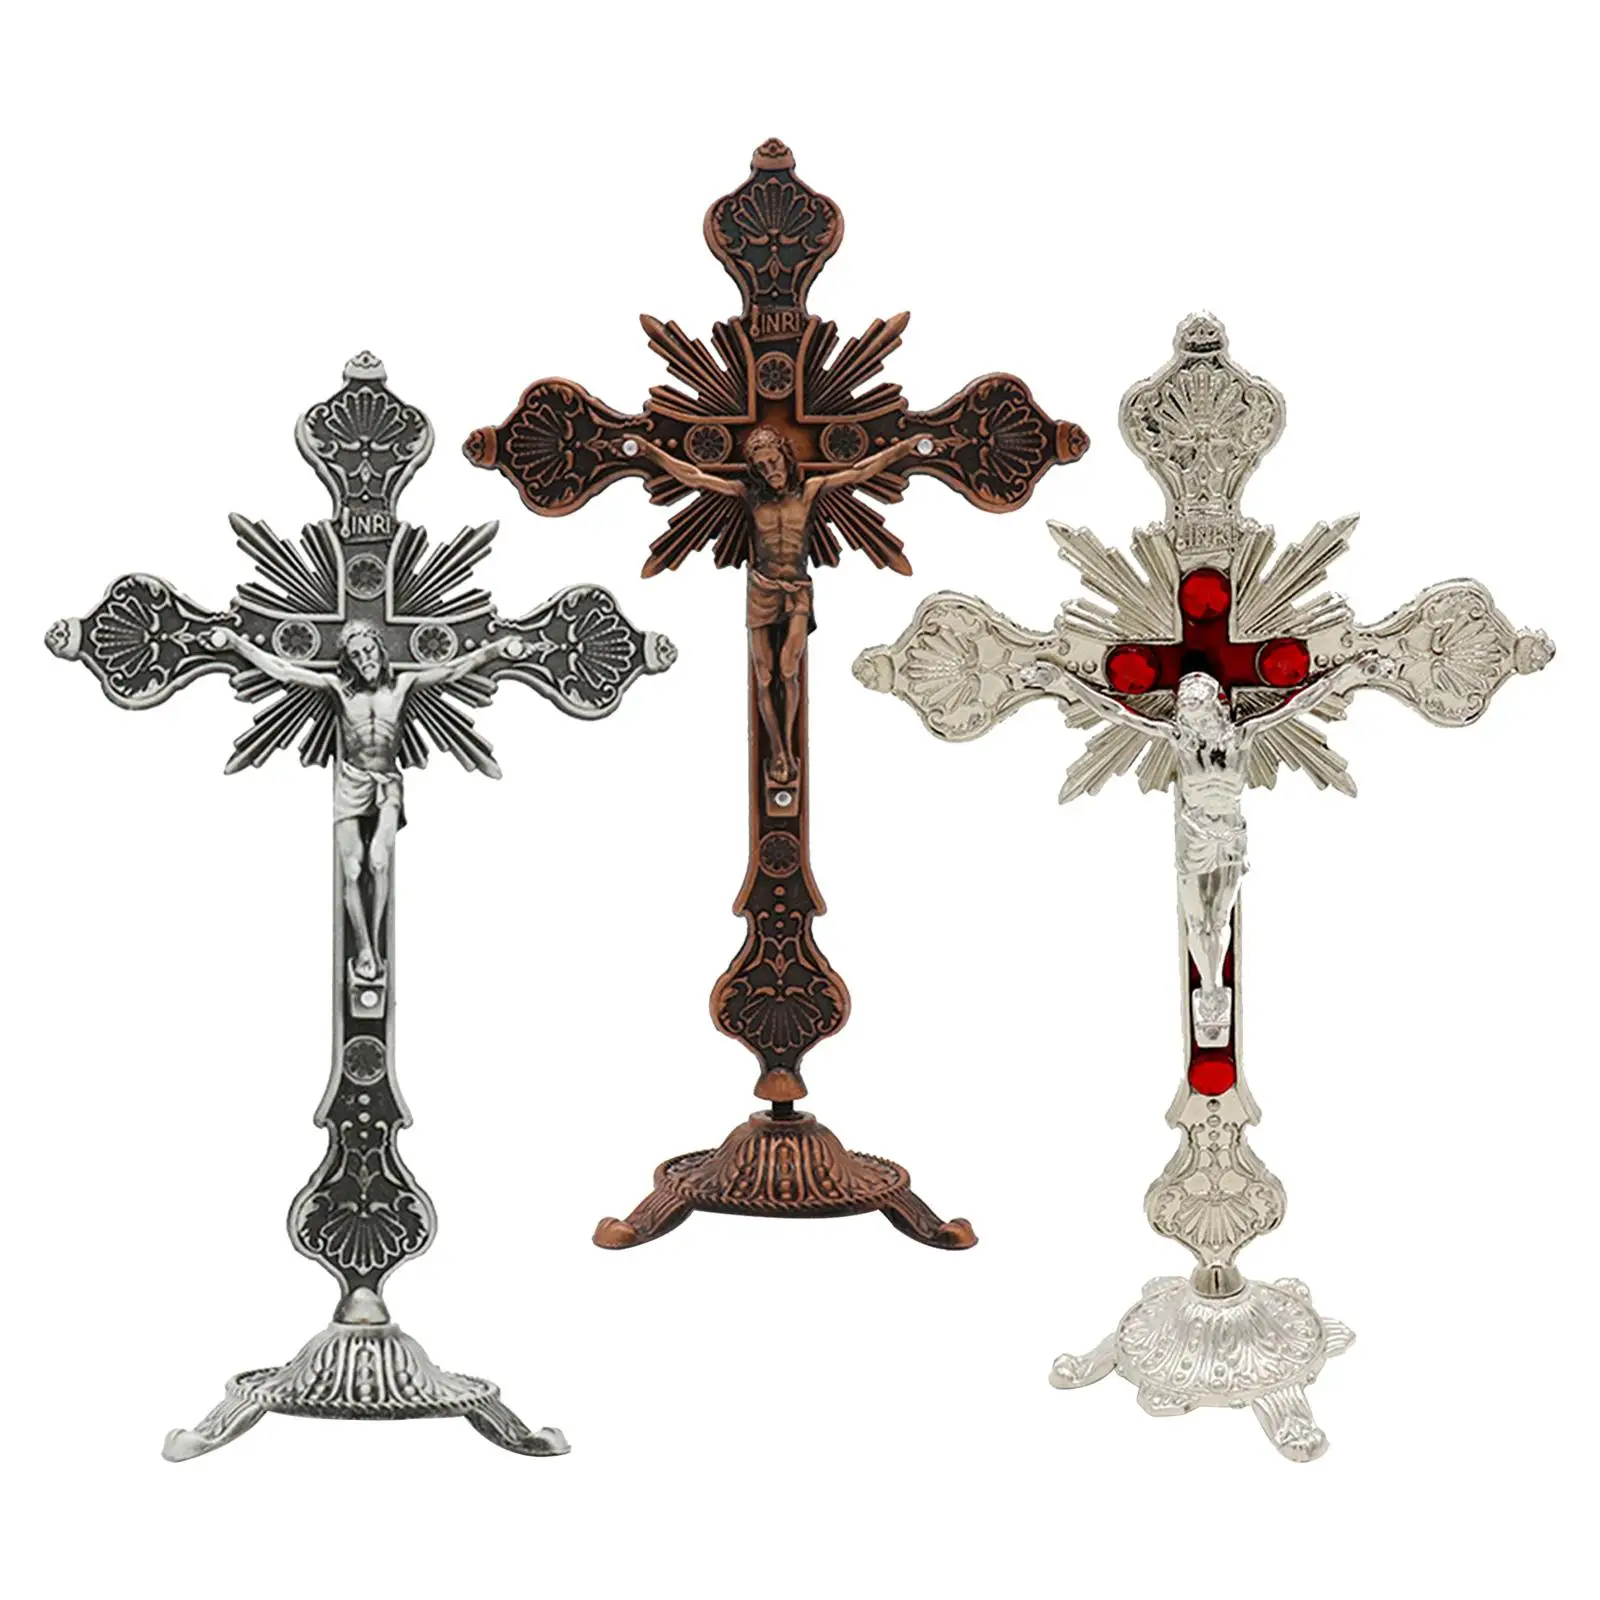 Standing Crucifix 10 Inches Small Metal Table Cross for Altar Table Chapel